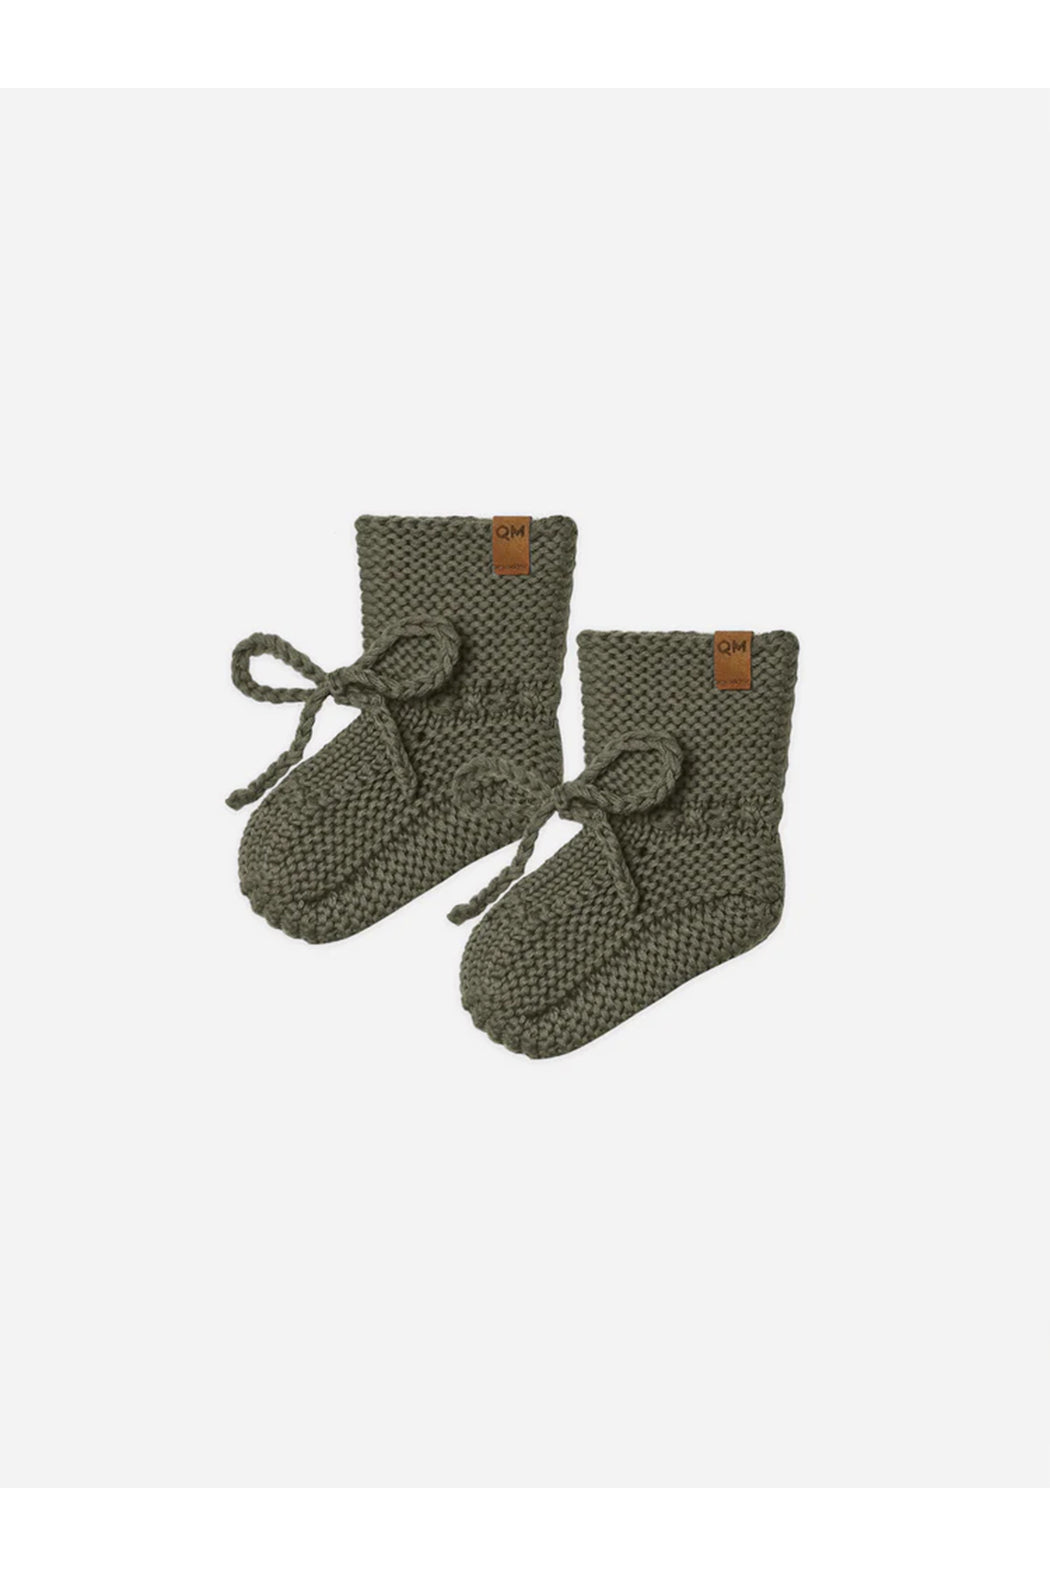 Quincy Mae Knit Booties - Forest